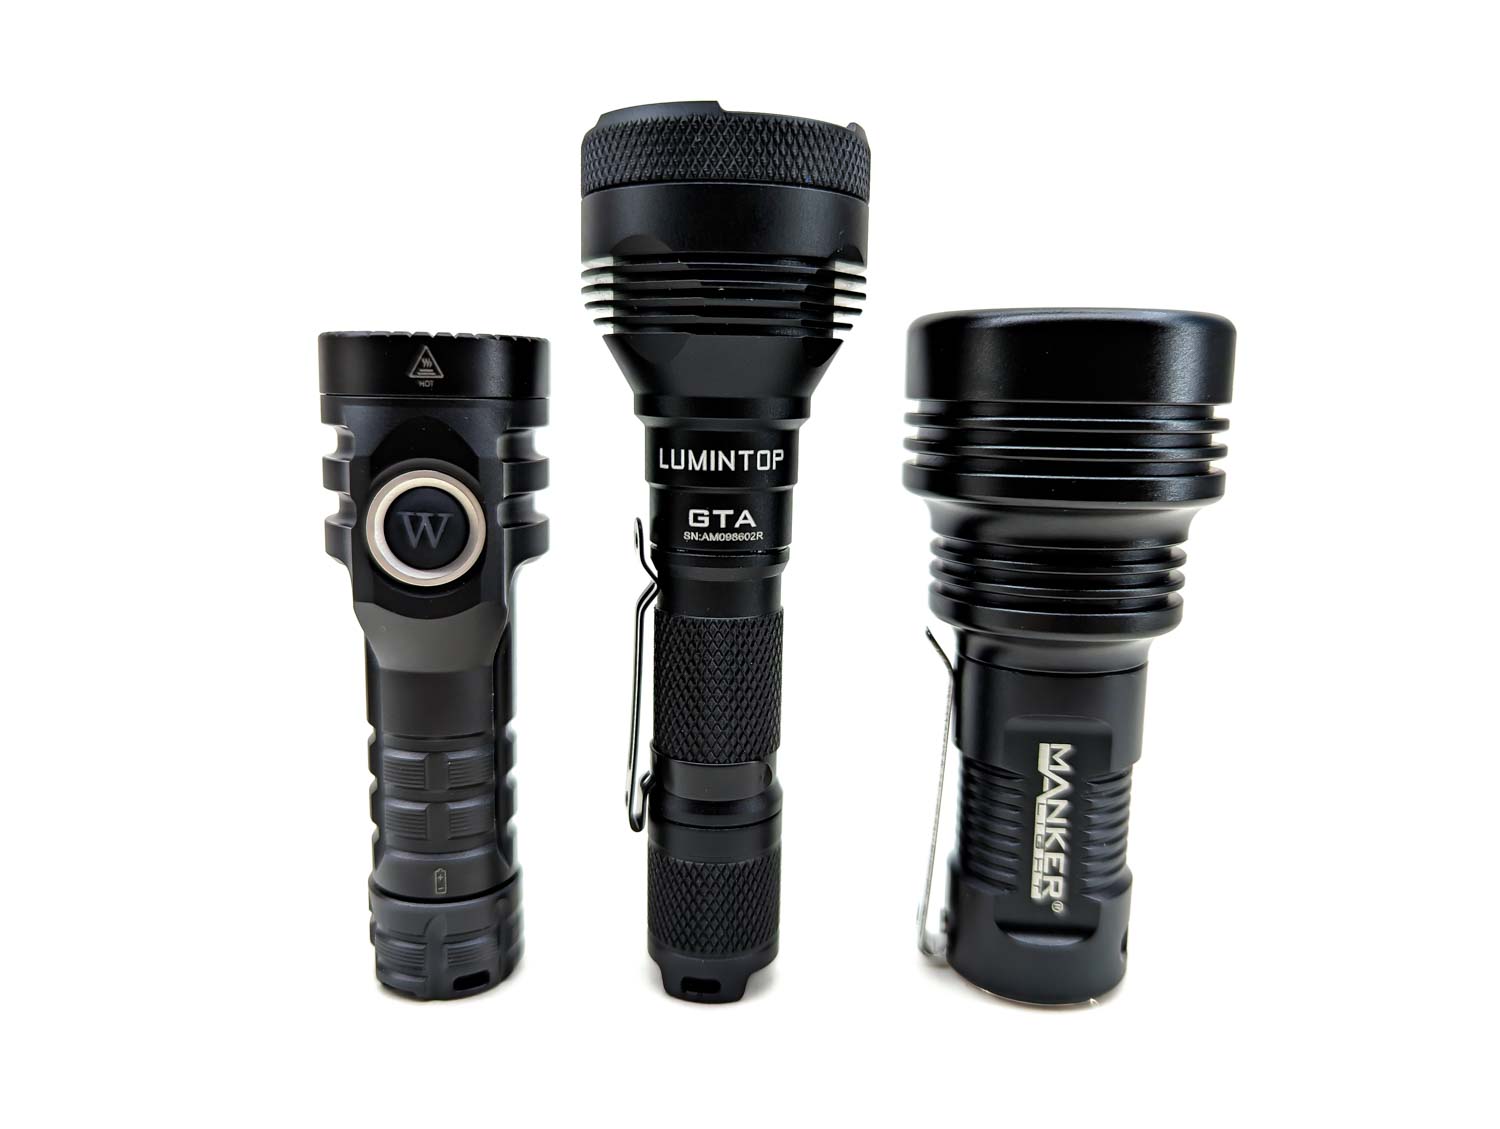 Lumintop GTA competition